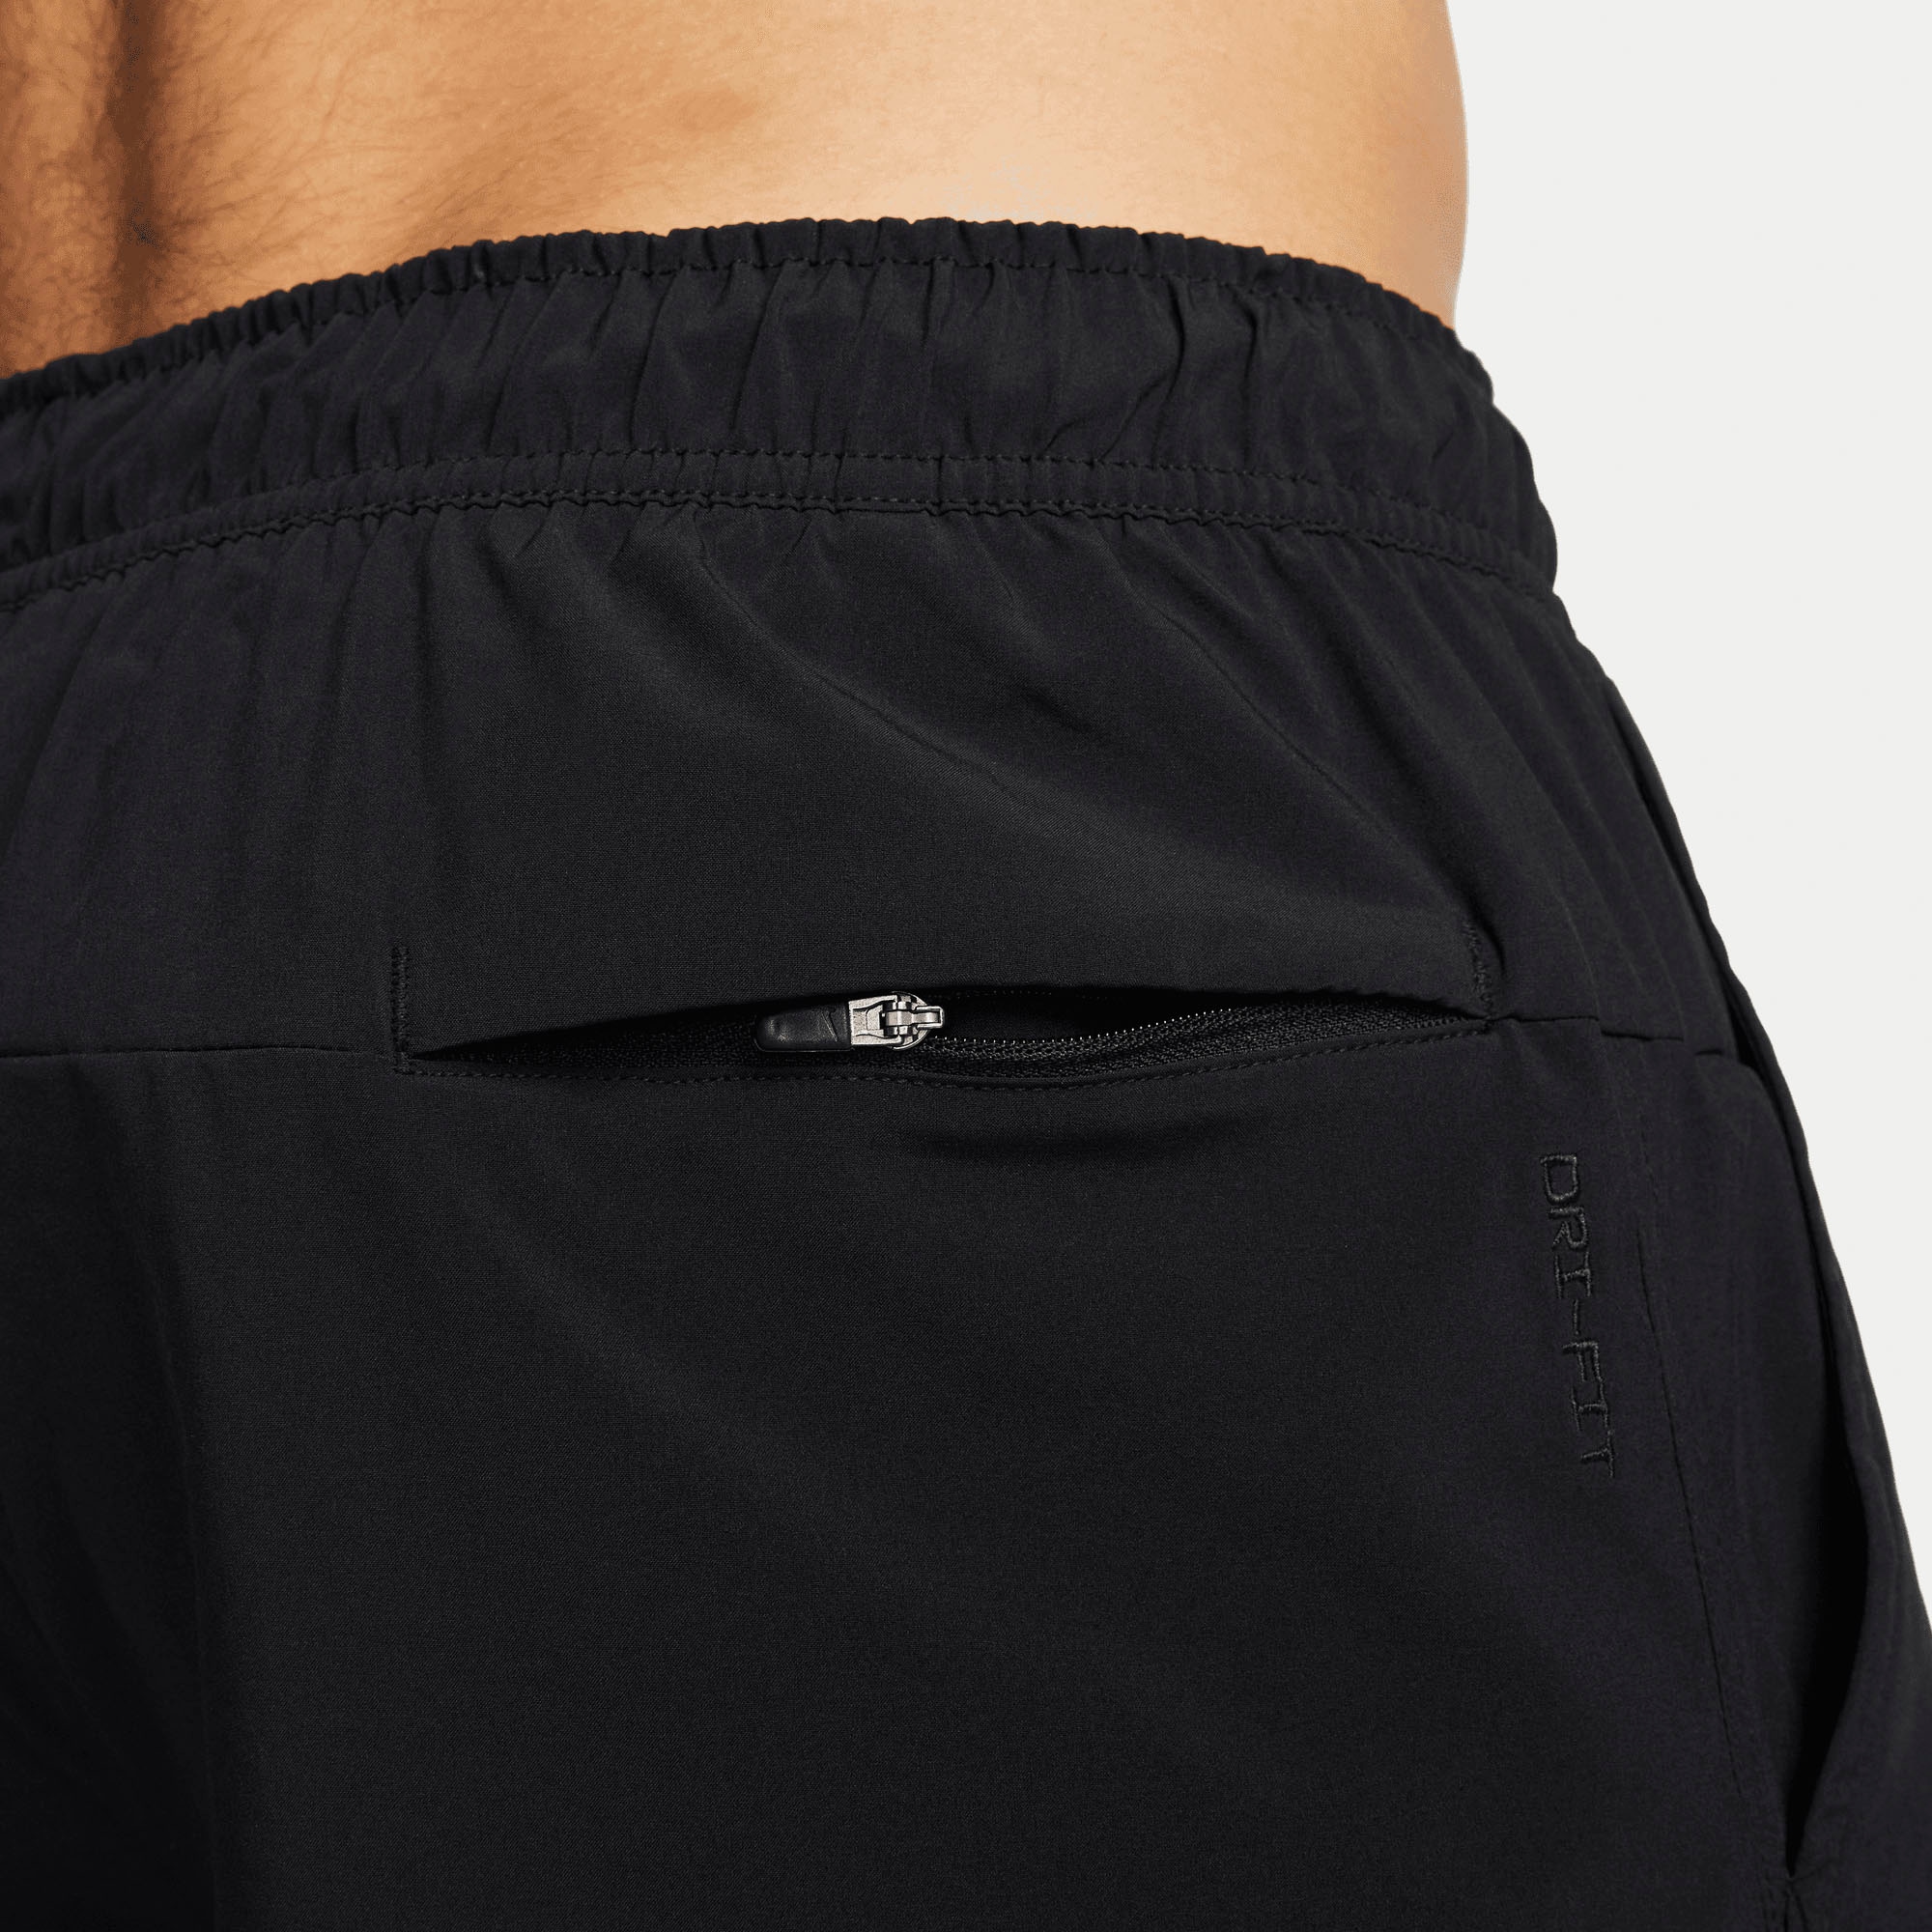 Nike Trainingsshorts »Dri-FIT Unlimited Men's " -in-1 Woven Fitness Shorts«